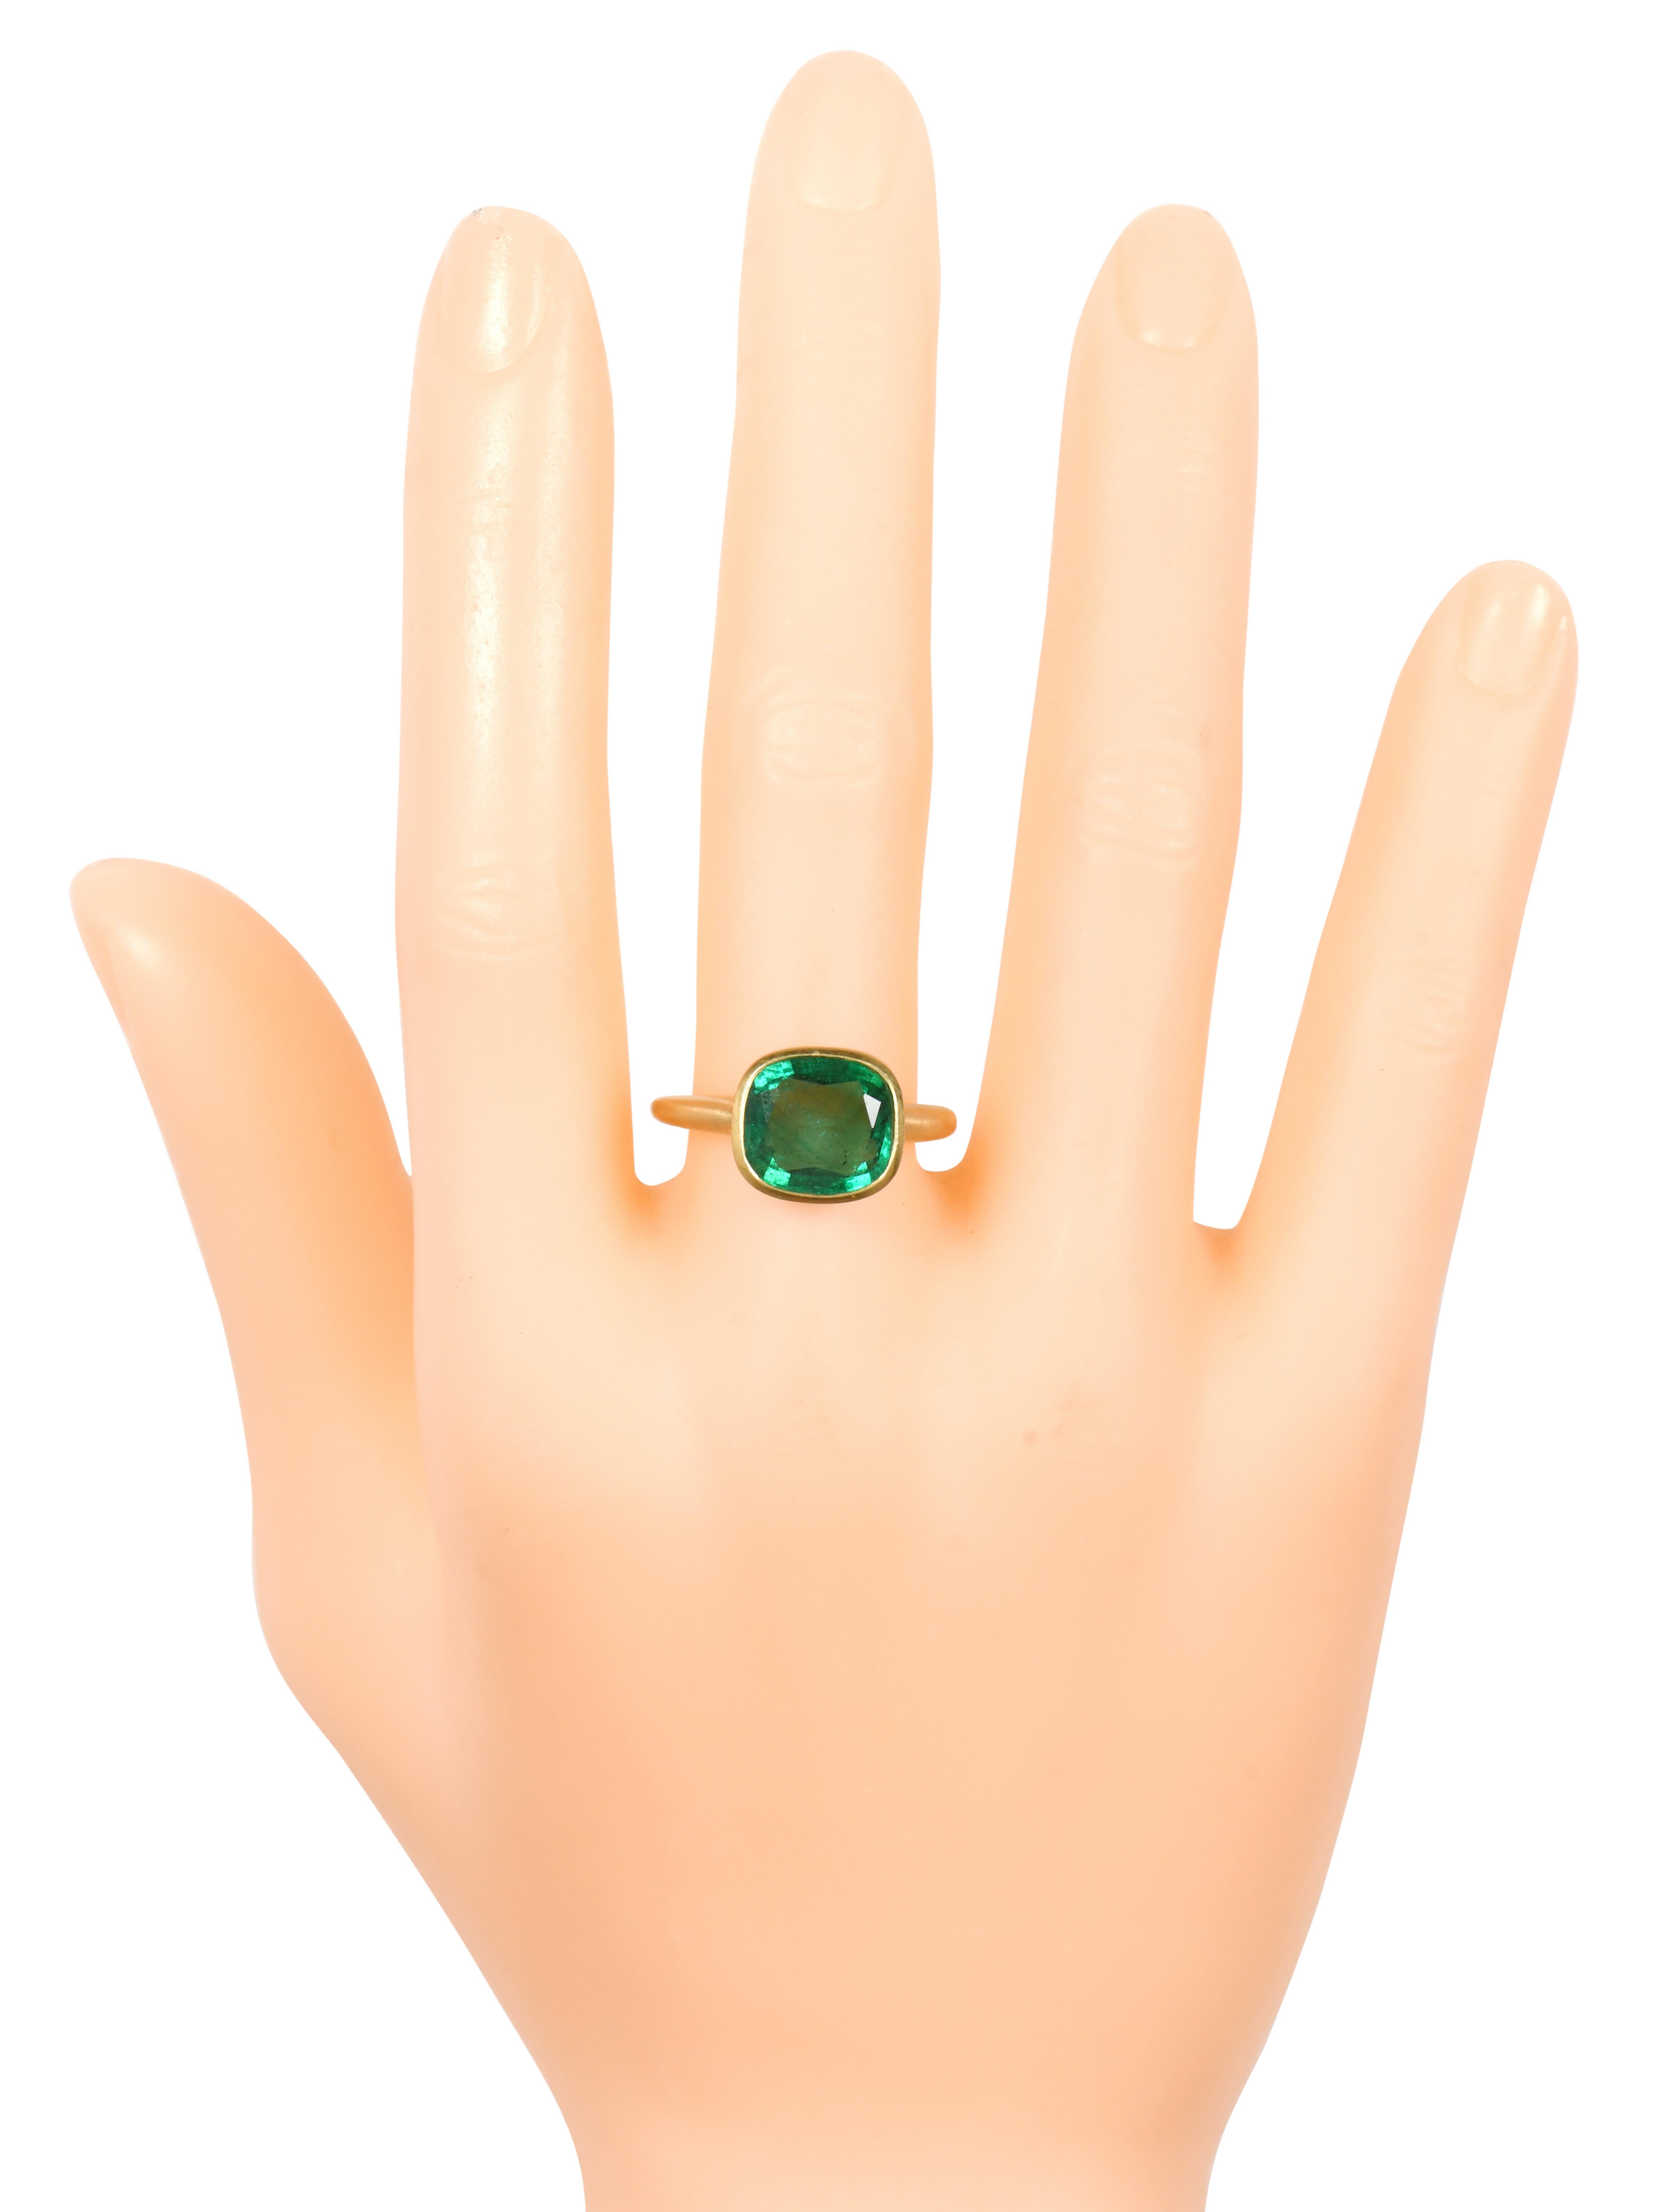 18 Karat Yellow Gold 3.20 Carat Cushion-Cut Natural Emerald Solitaire Ring

This exemplary parakeet green emerald ring is truly fantastic. It’s a specially cushion cut deep green emerald enclosed in matt finish Italian yellow gold in the evenly